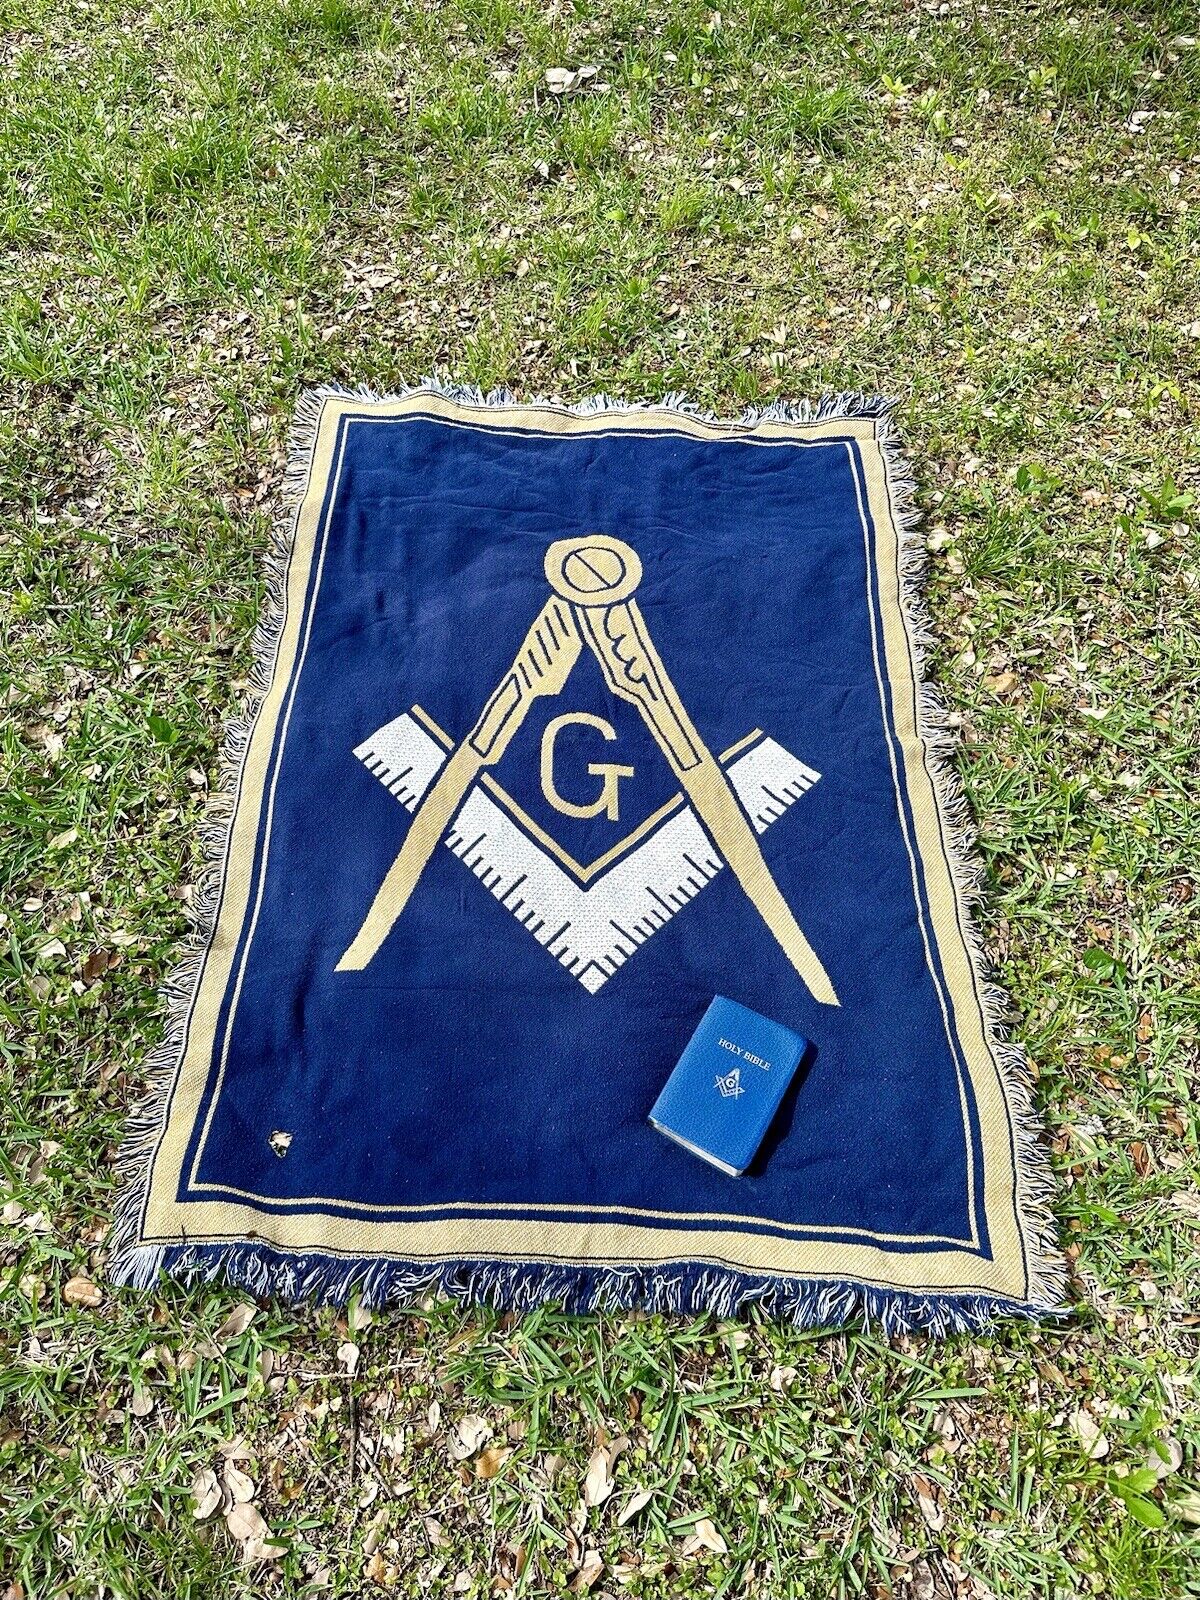 Freemason Masonic Blanket RUG 69 x 49” & Book Authentic Official Issued Vintage